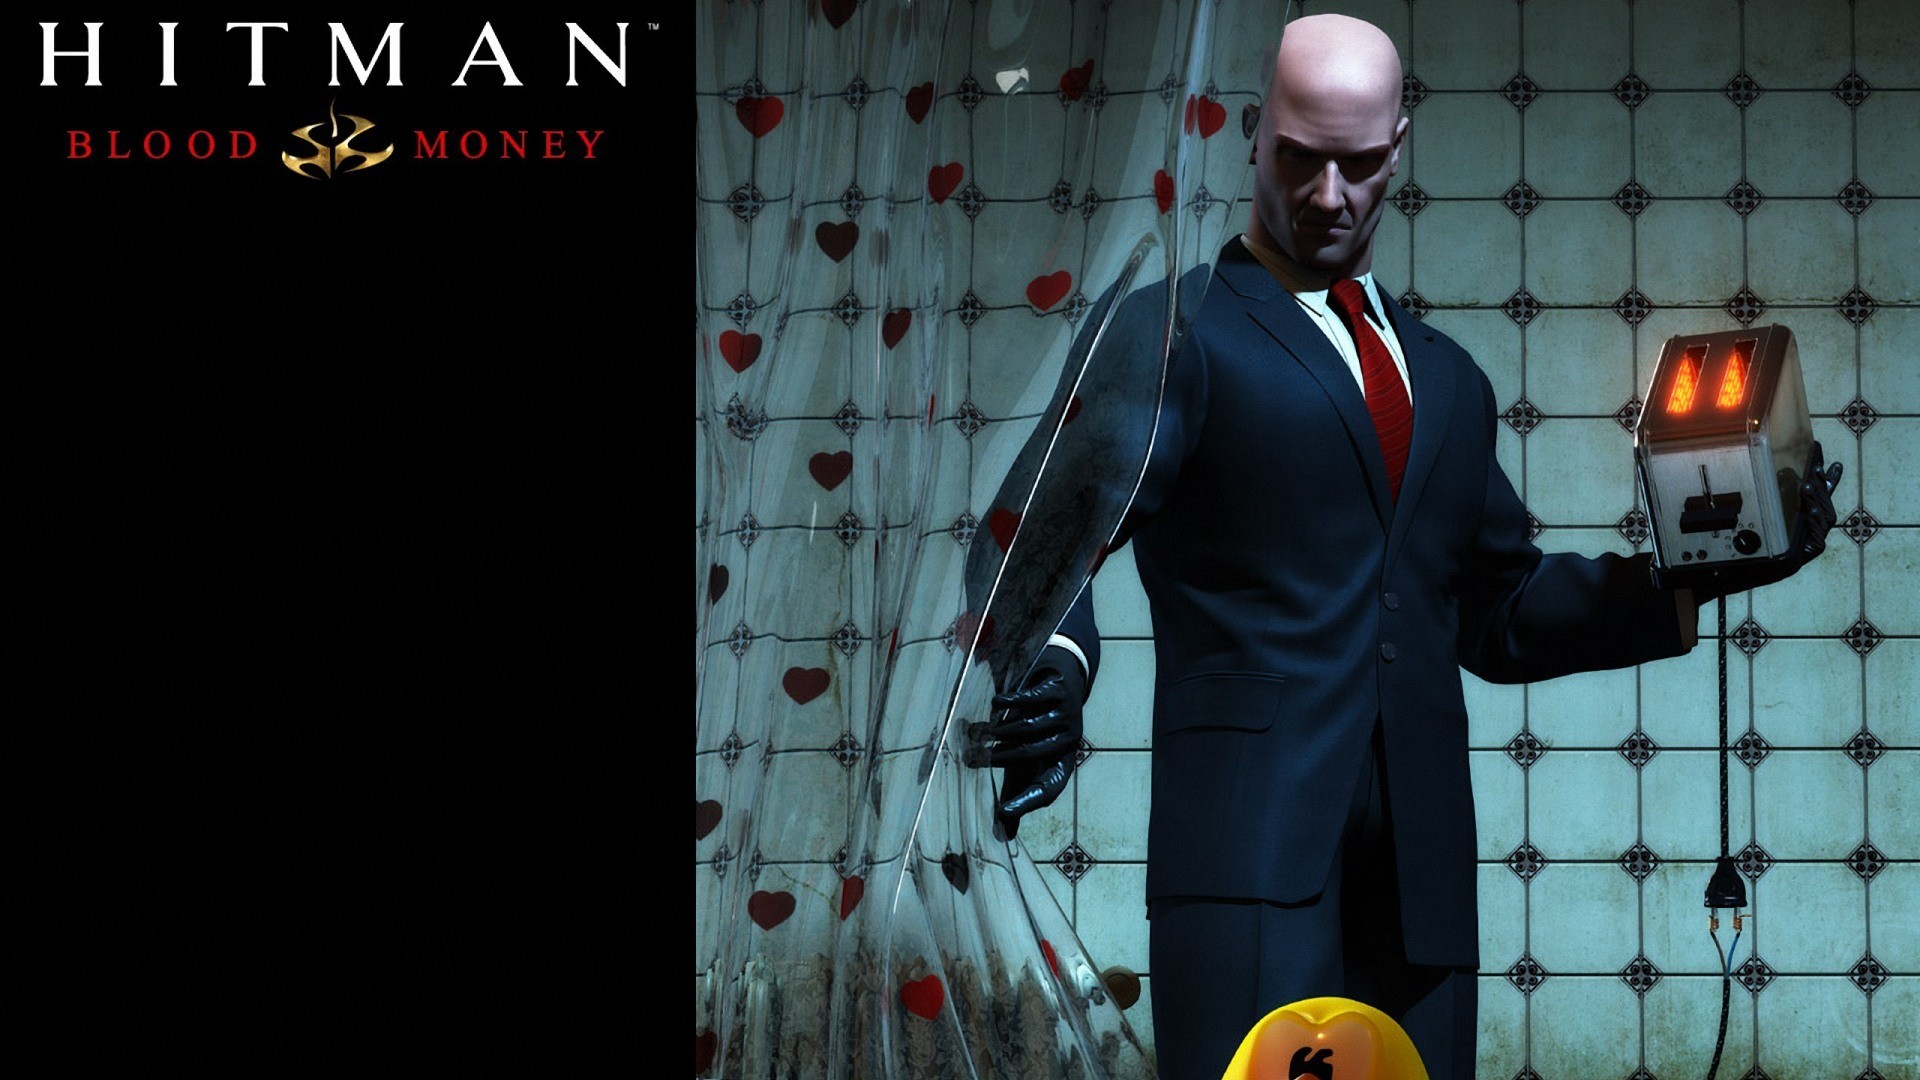 Wallpaper Abyss Images Of Hitman Blood Money - Hitman Blood Money Poster , HD Wallpaper & Backgrounds